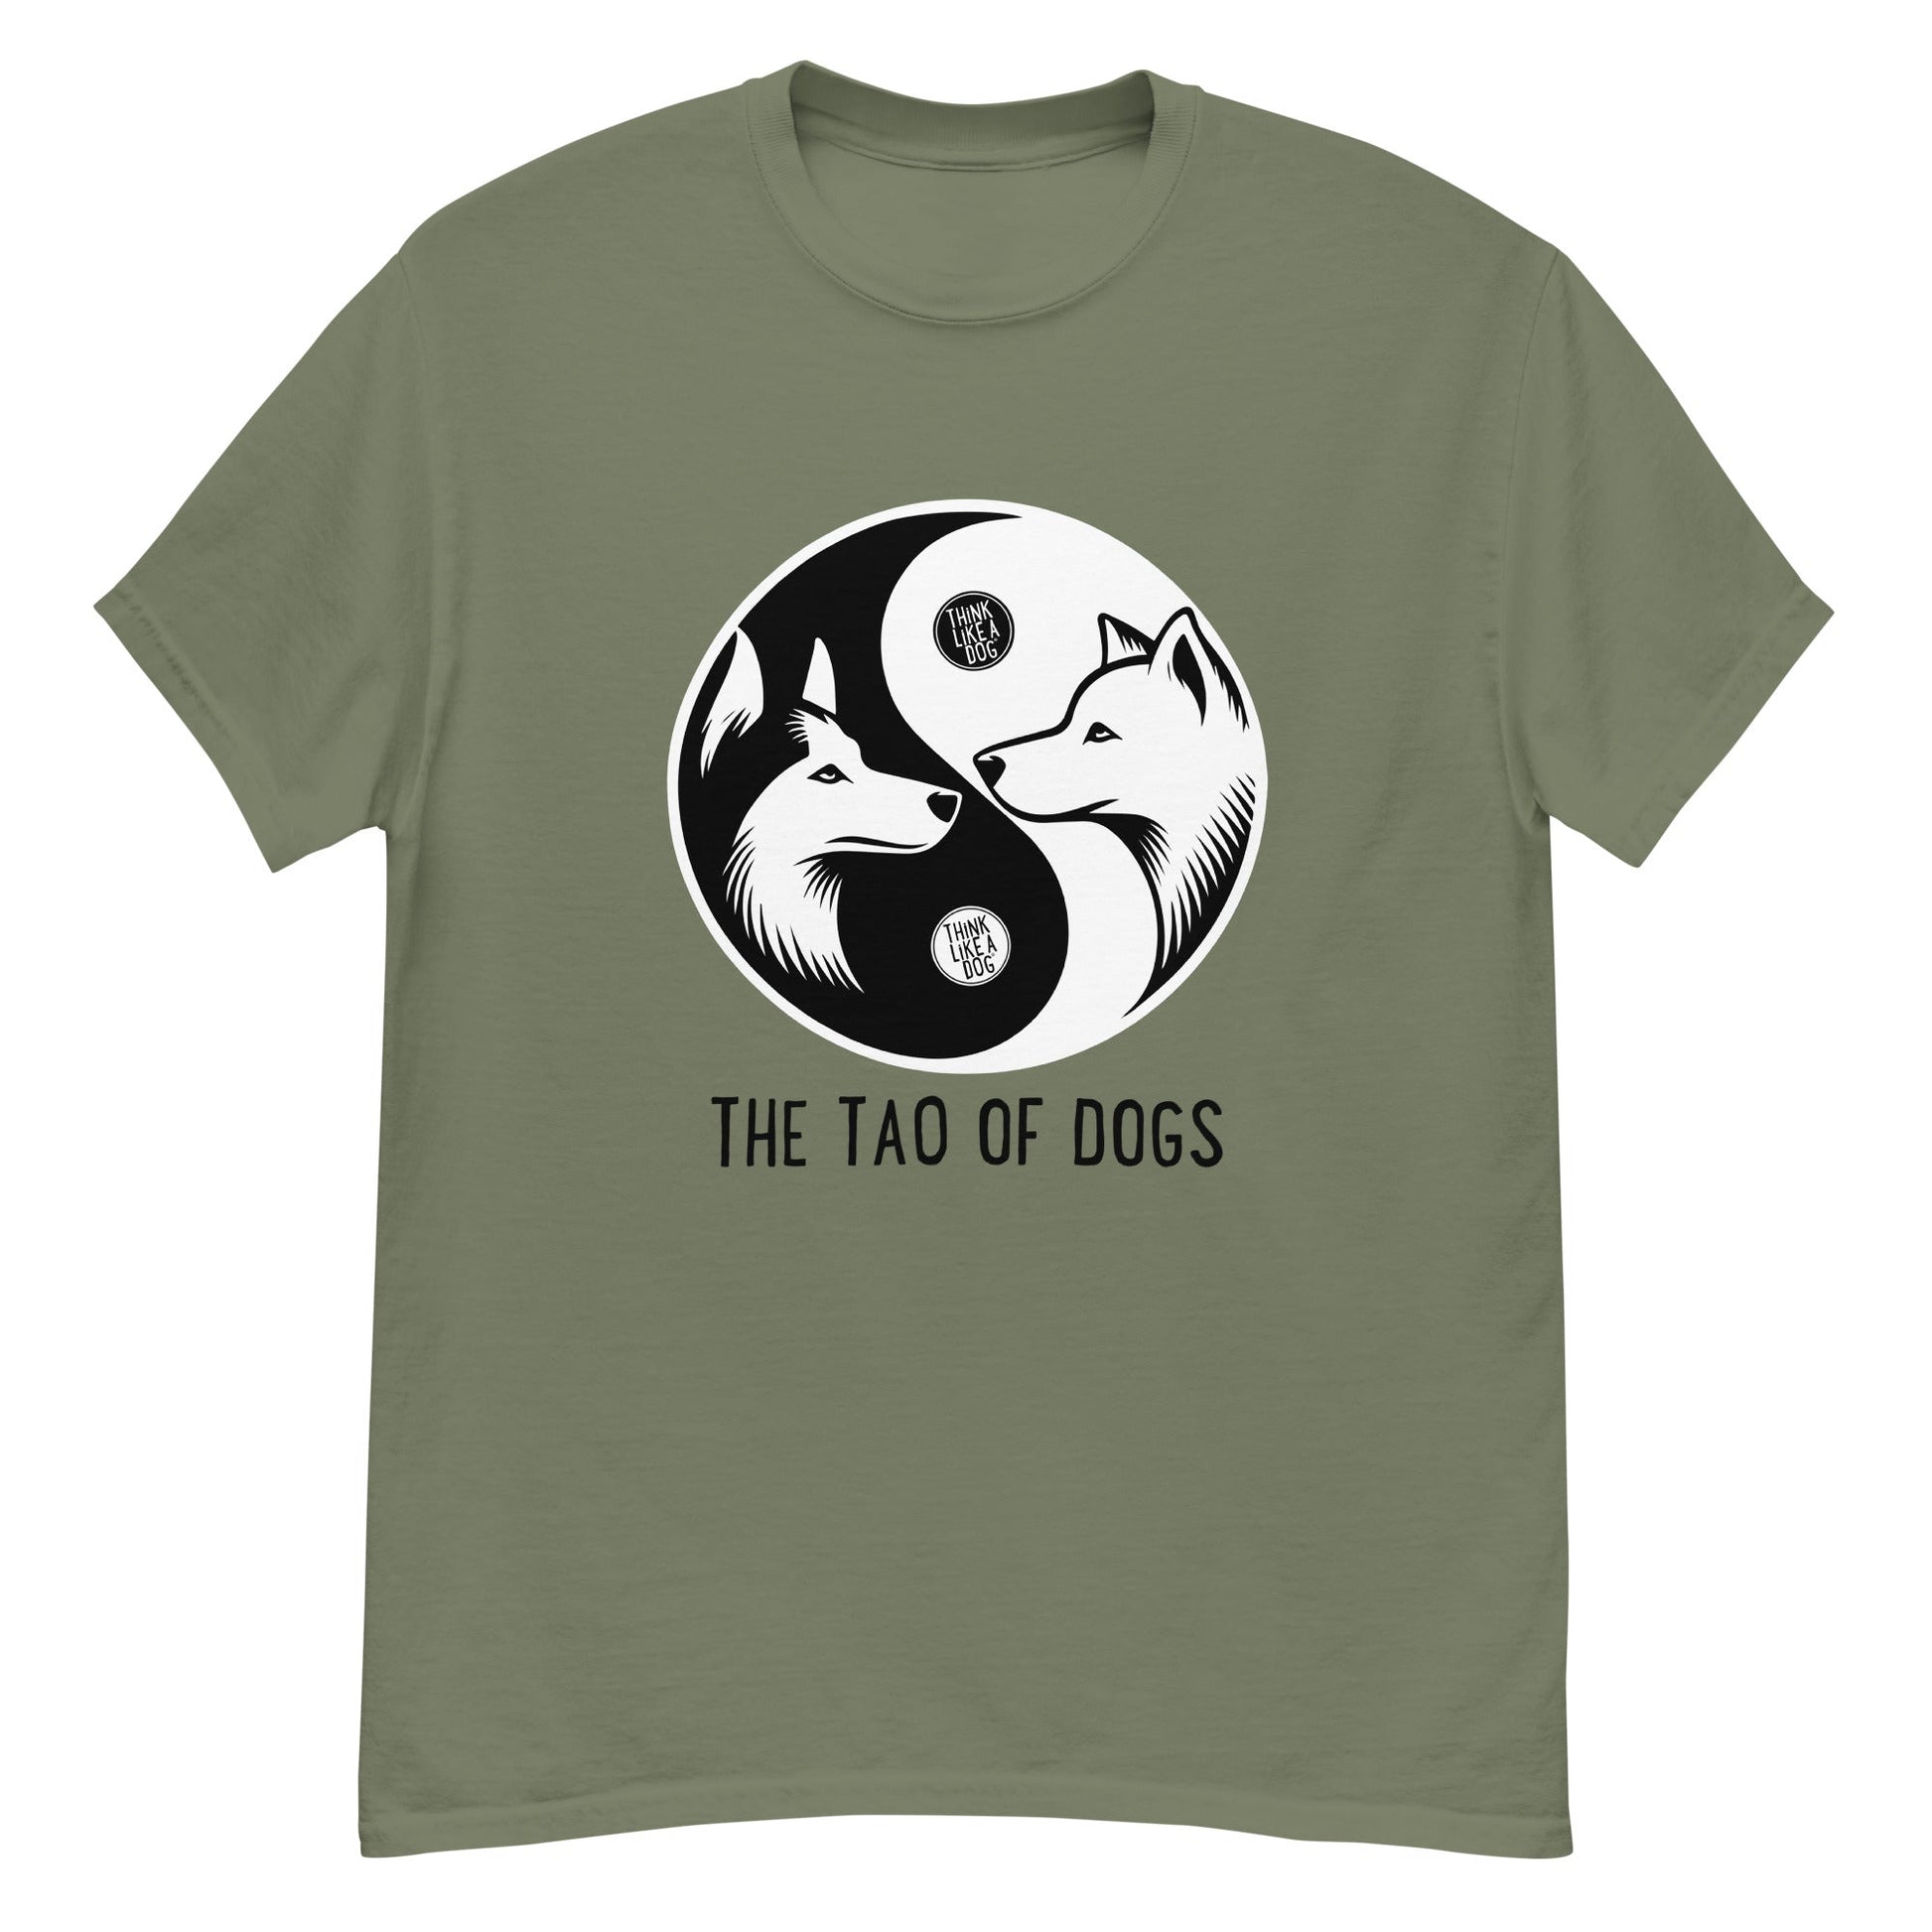 Men's Classic Tee The Tao Of Dogs - THiNK LiKE A DOG®